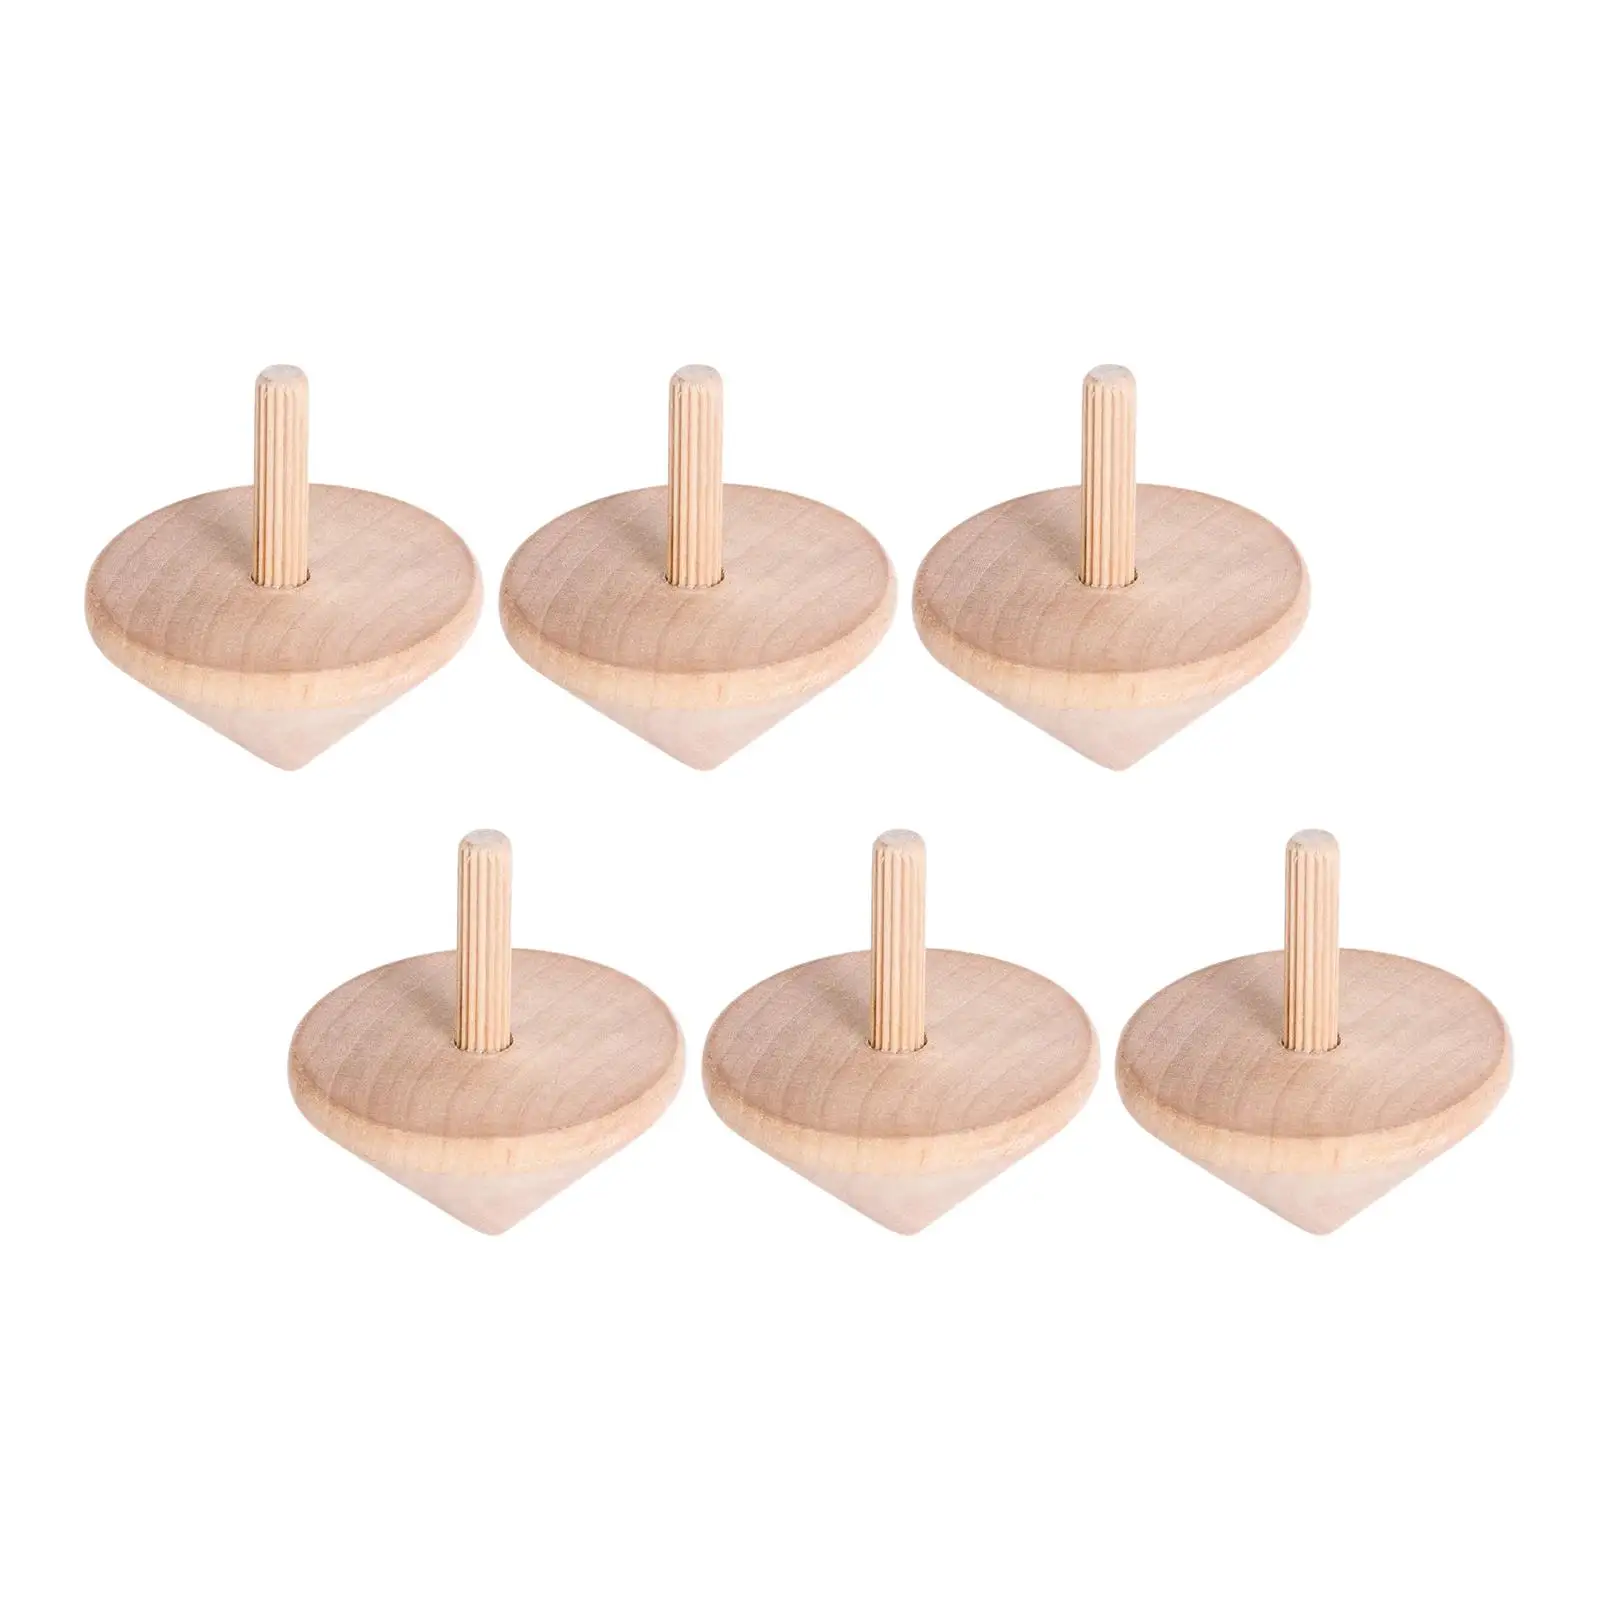 6Pcs Unpainted Wood Blank Tops Educational Toys Wooden Top Novelty Wooden Gyroscopes Toy for Kids Children Party Supplies Games